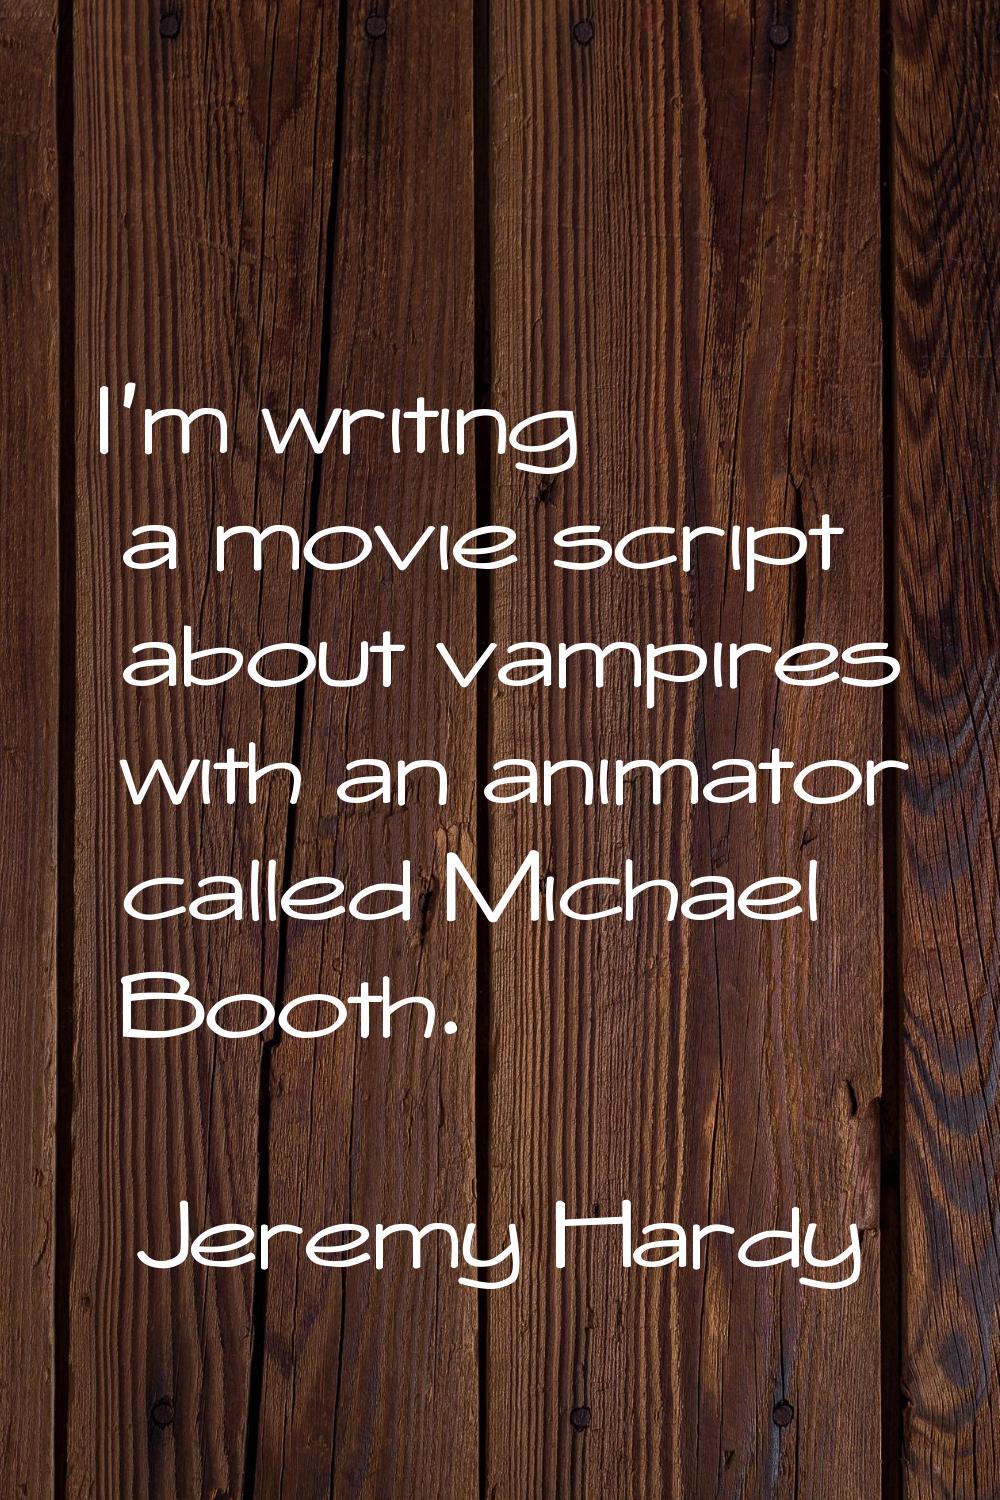 I'm writing a movie script about vampires with an animator called Michael Booth.